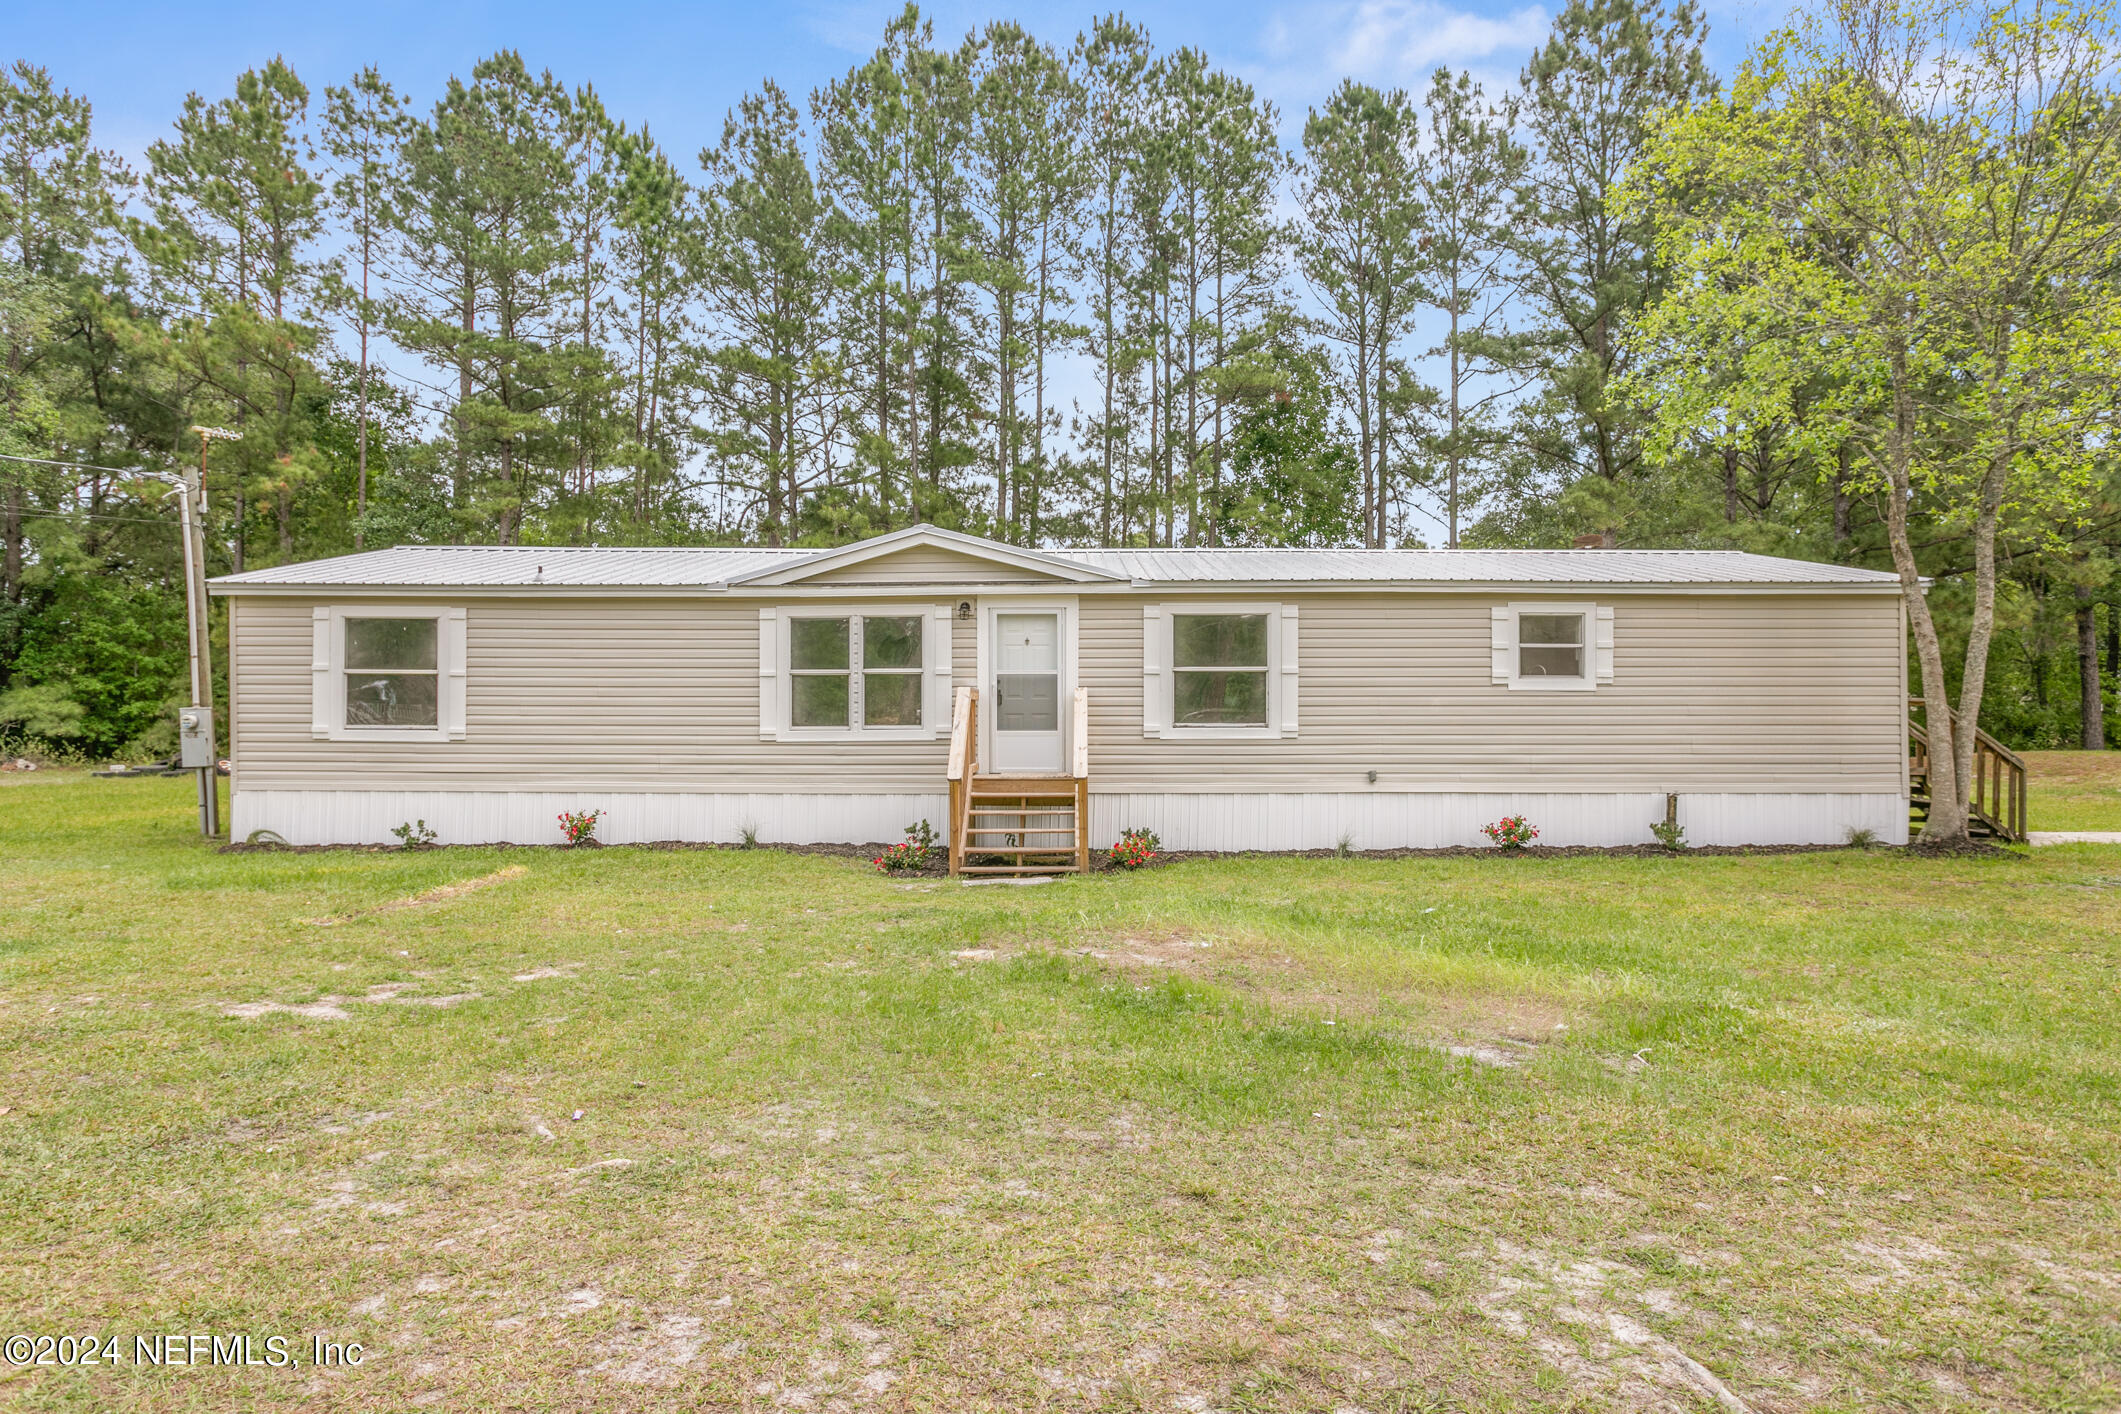 Middleburg, FL home for sale located at 2095 HERMITAGE Place, Middleburg, FL 32068